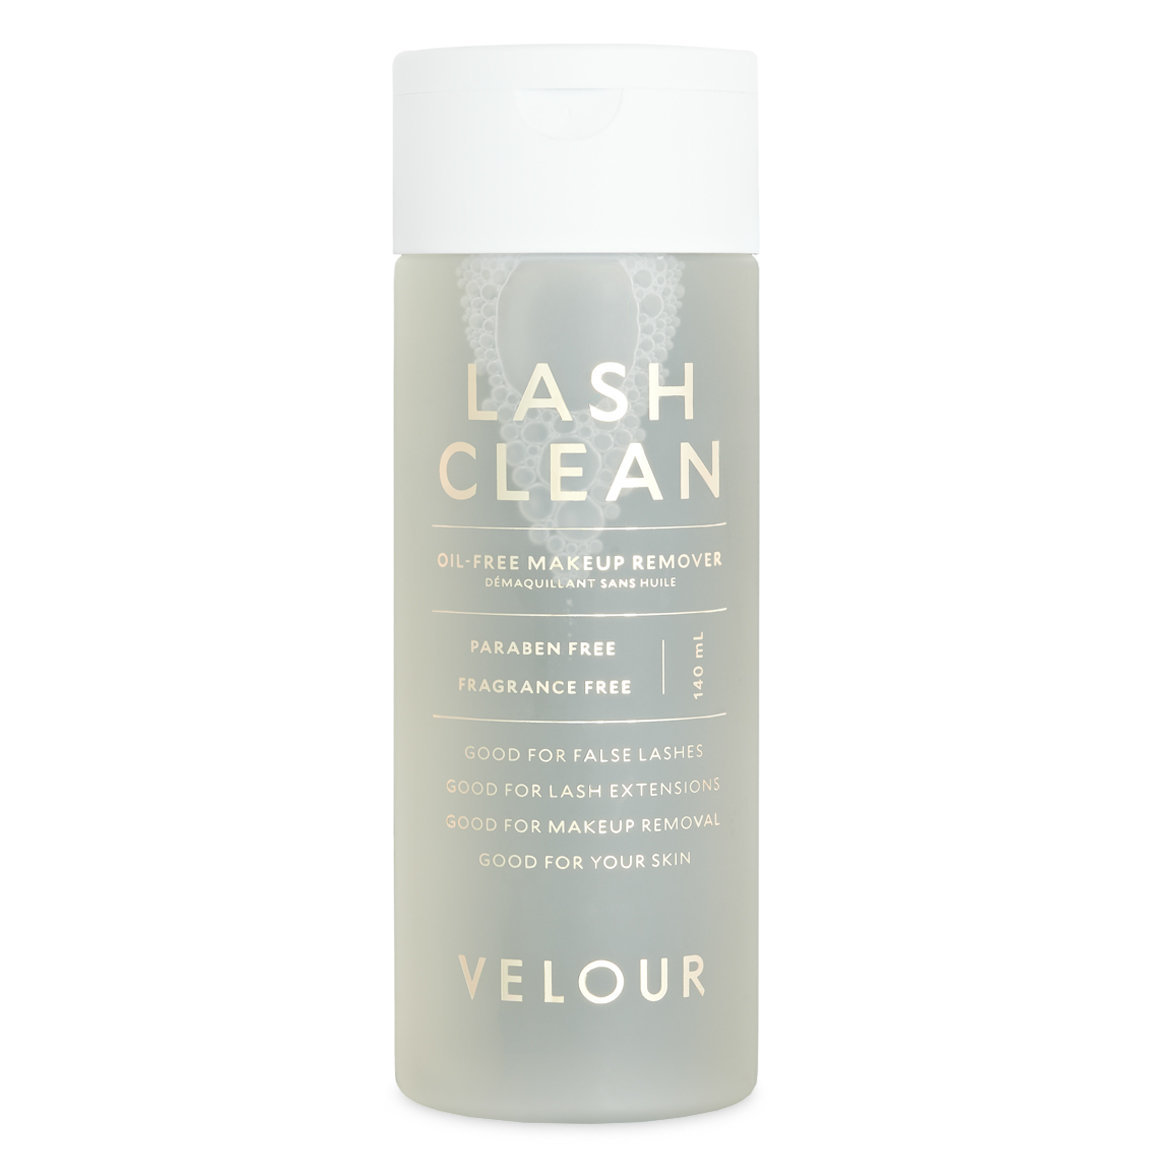 Velour Beauty Lash Clean 140 ml alternative view 1 - product swatch.